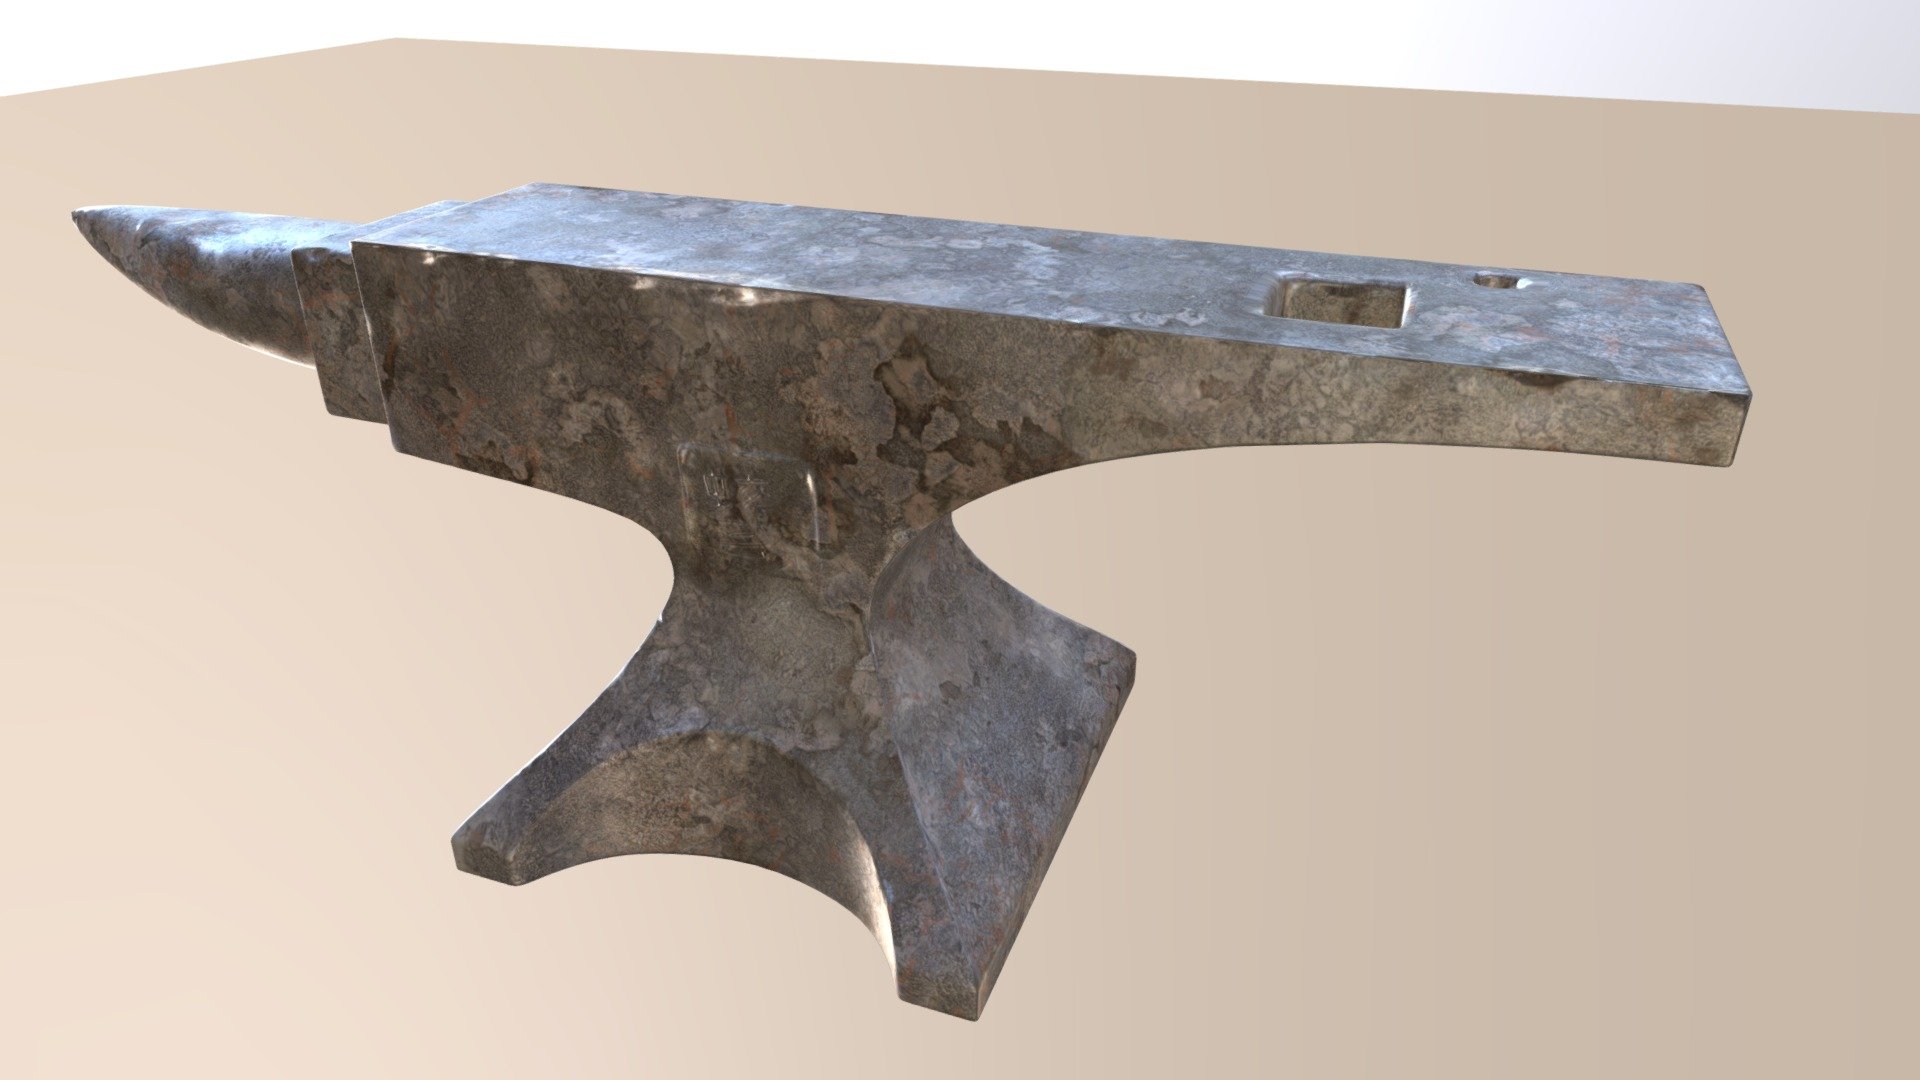 ANVIL download the last version for android